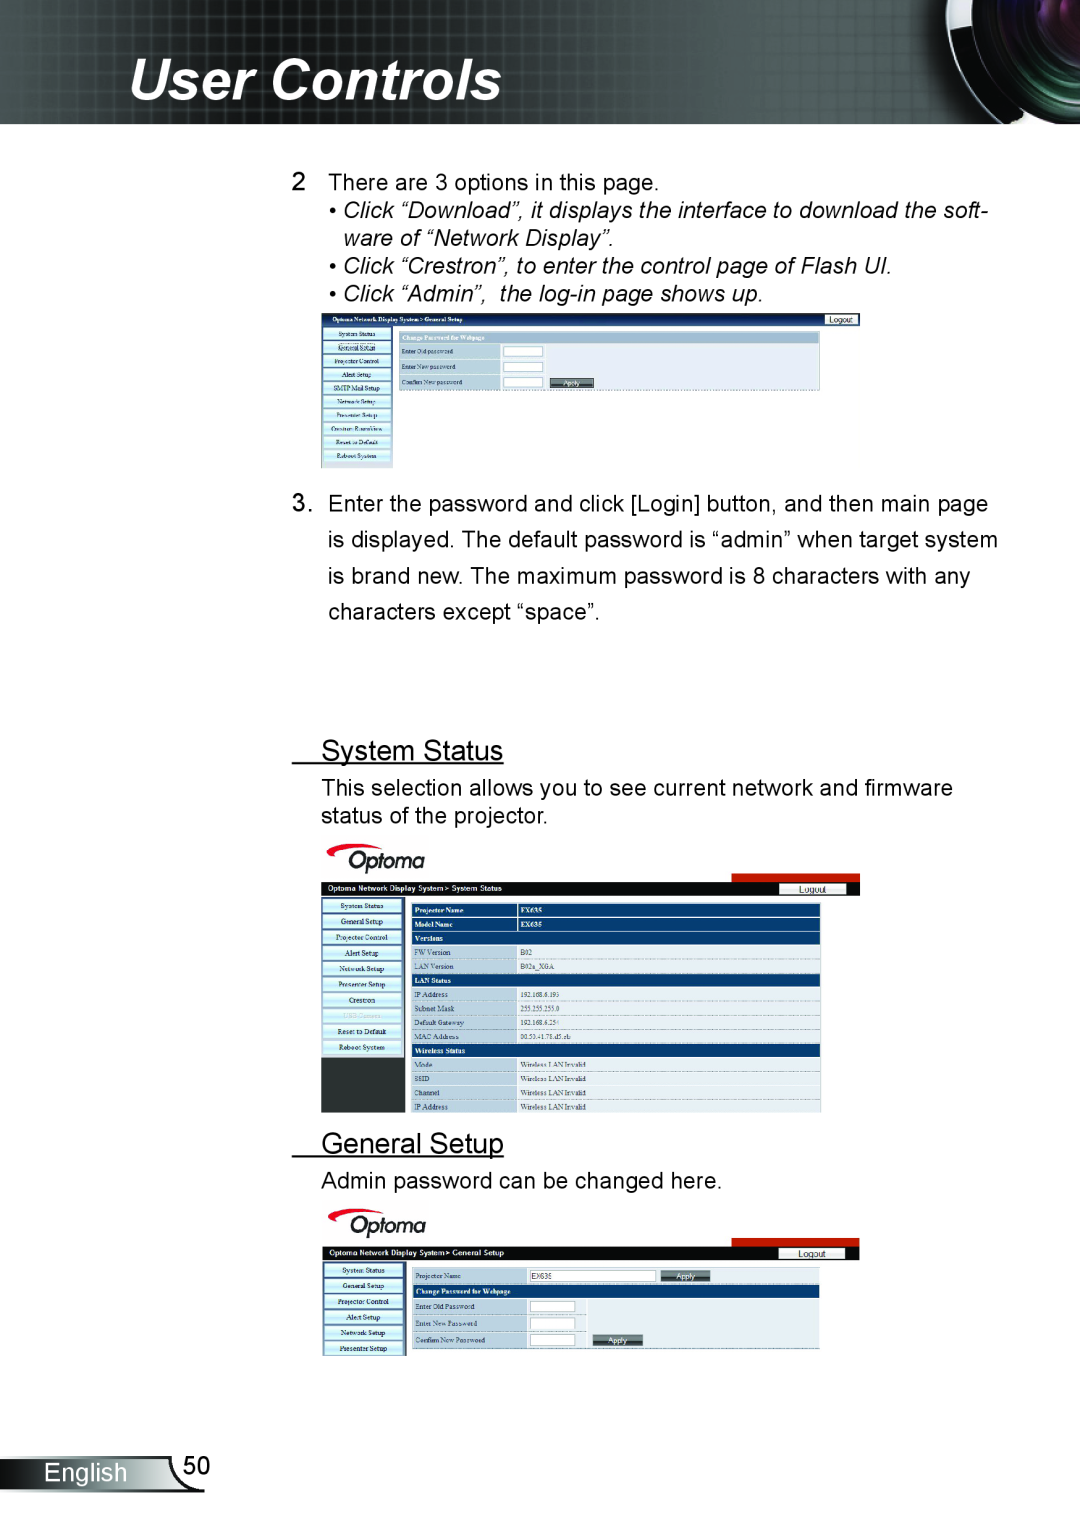 Optoma Technology TW6353D System Status, General Setup, User Controls, English, Click “Admin”, the log-in page shows up 